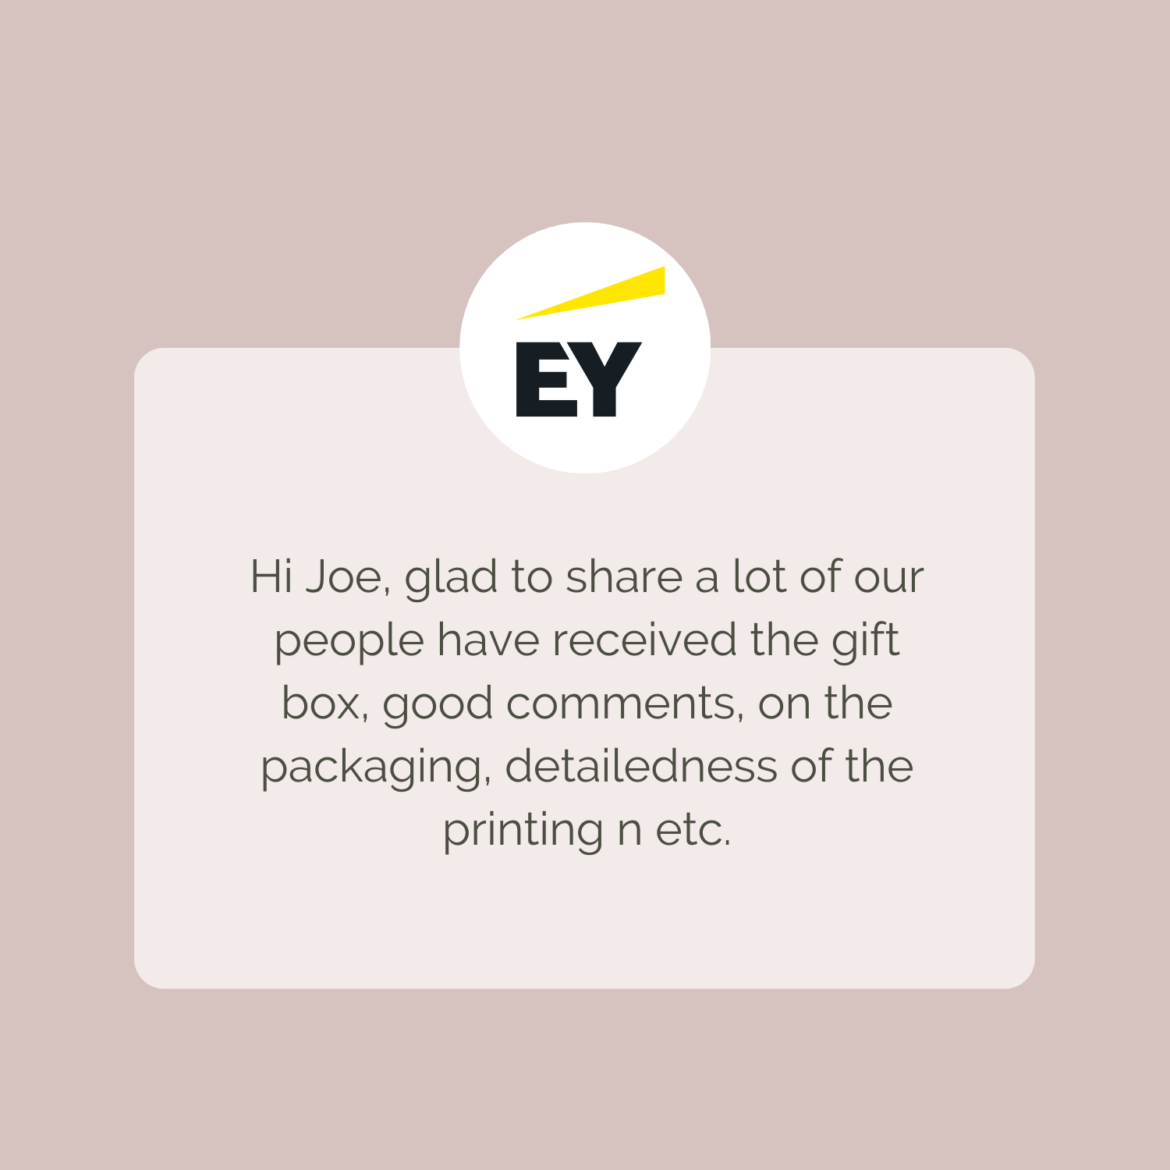 Corporate Review - EY